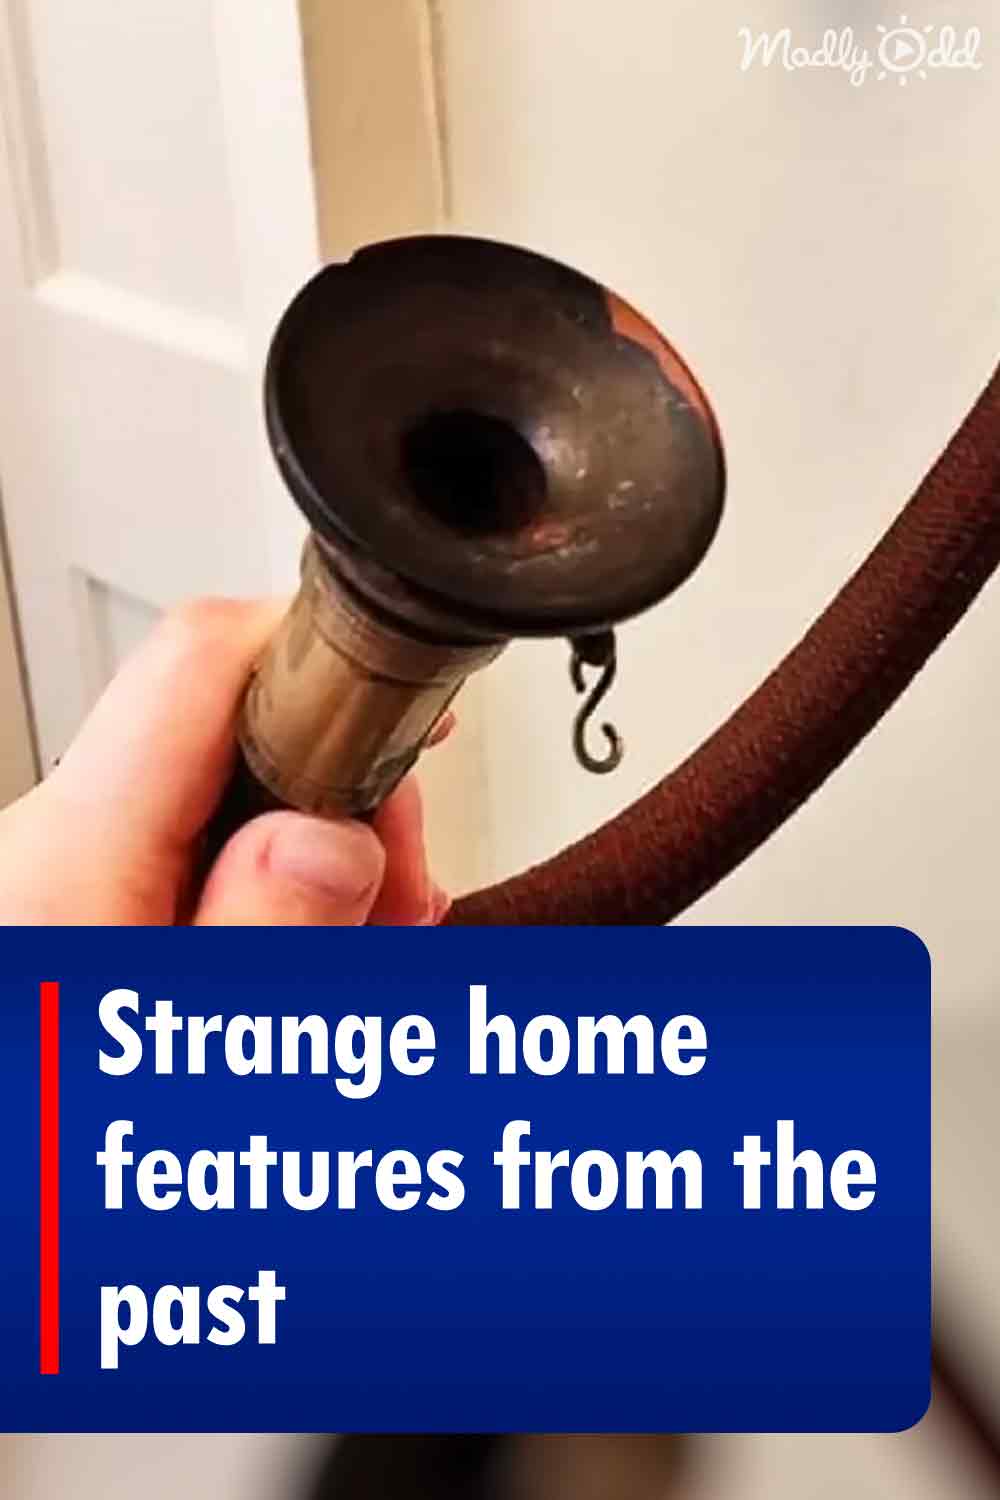 Strange home features from the past